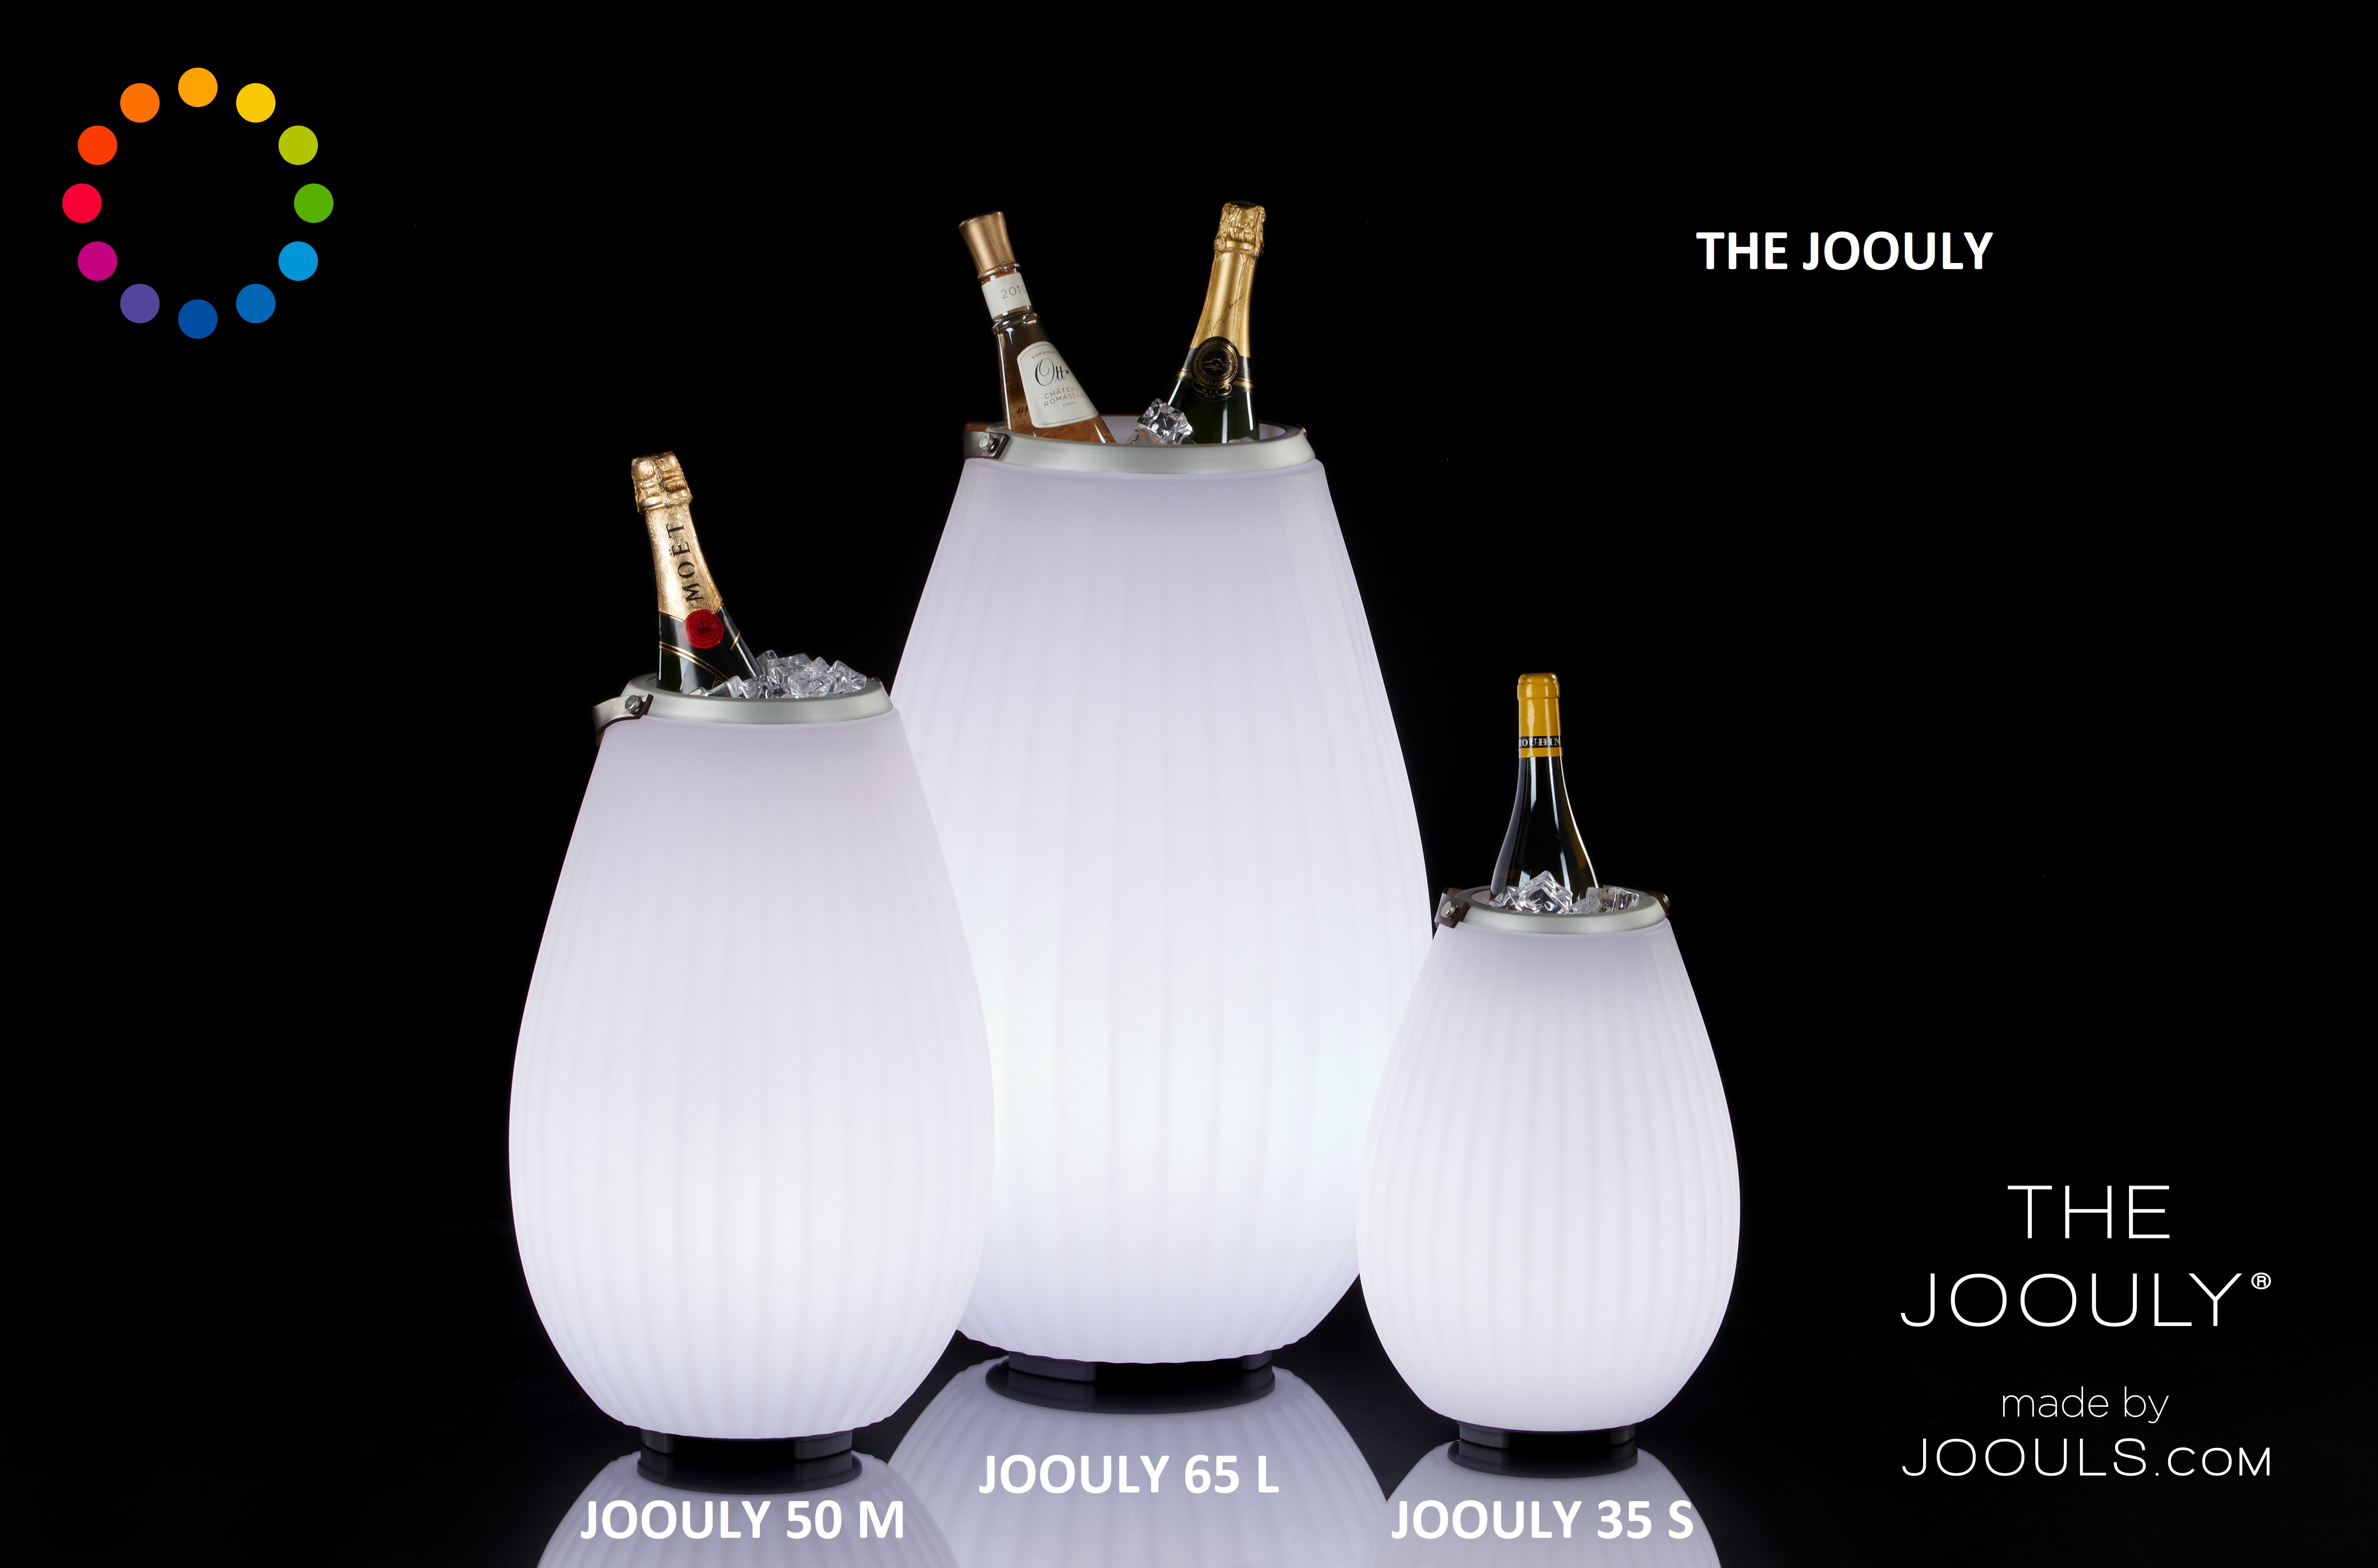 The Joouly 65